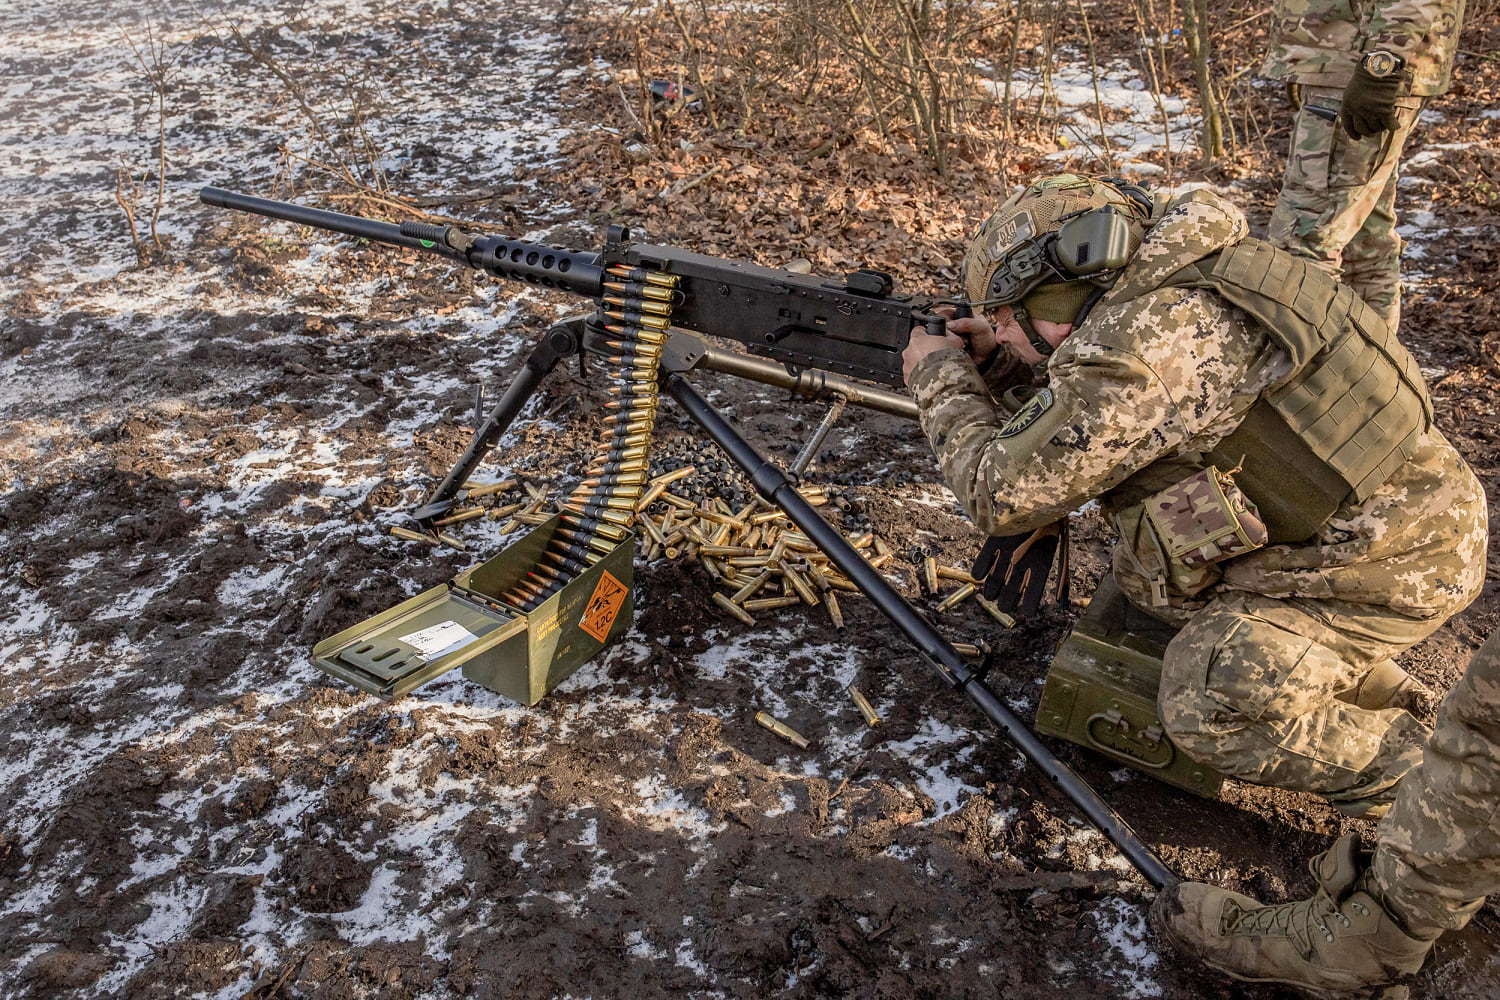 Ukraine battles an emboldened Russia and a divided West 2 years into war